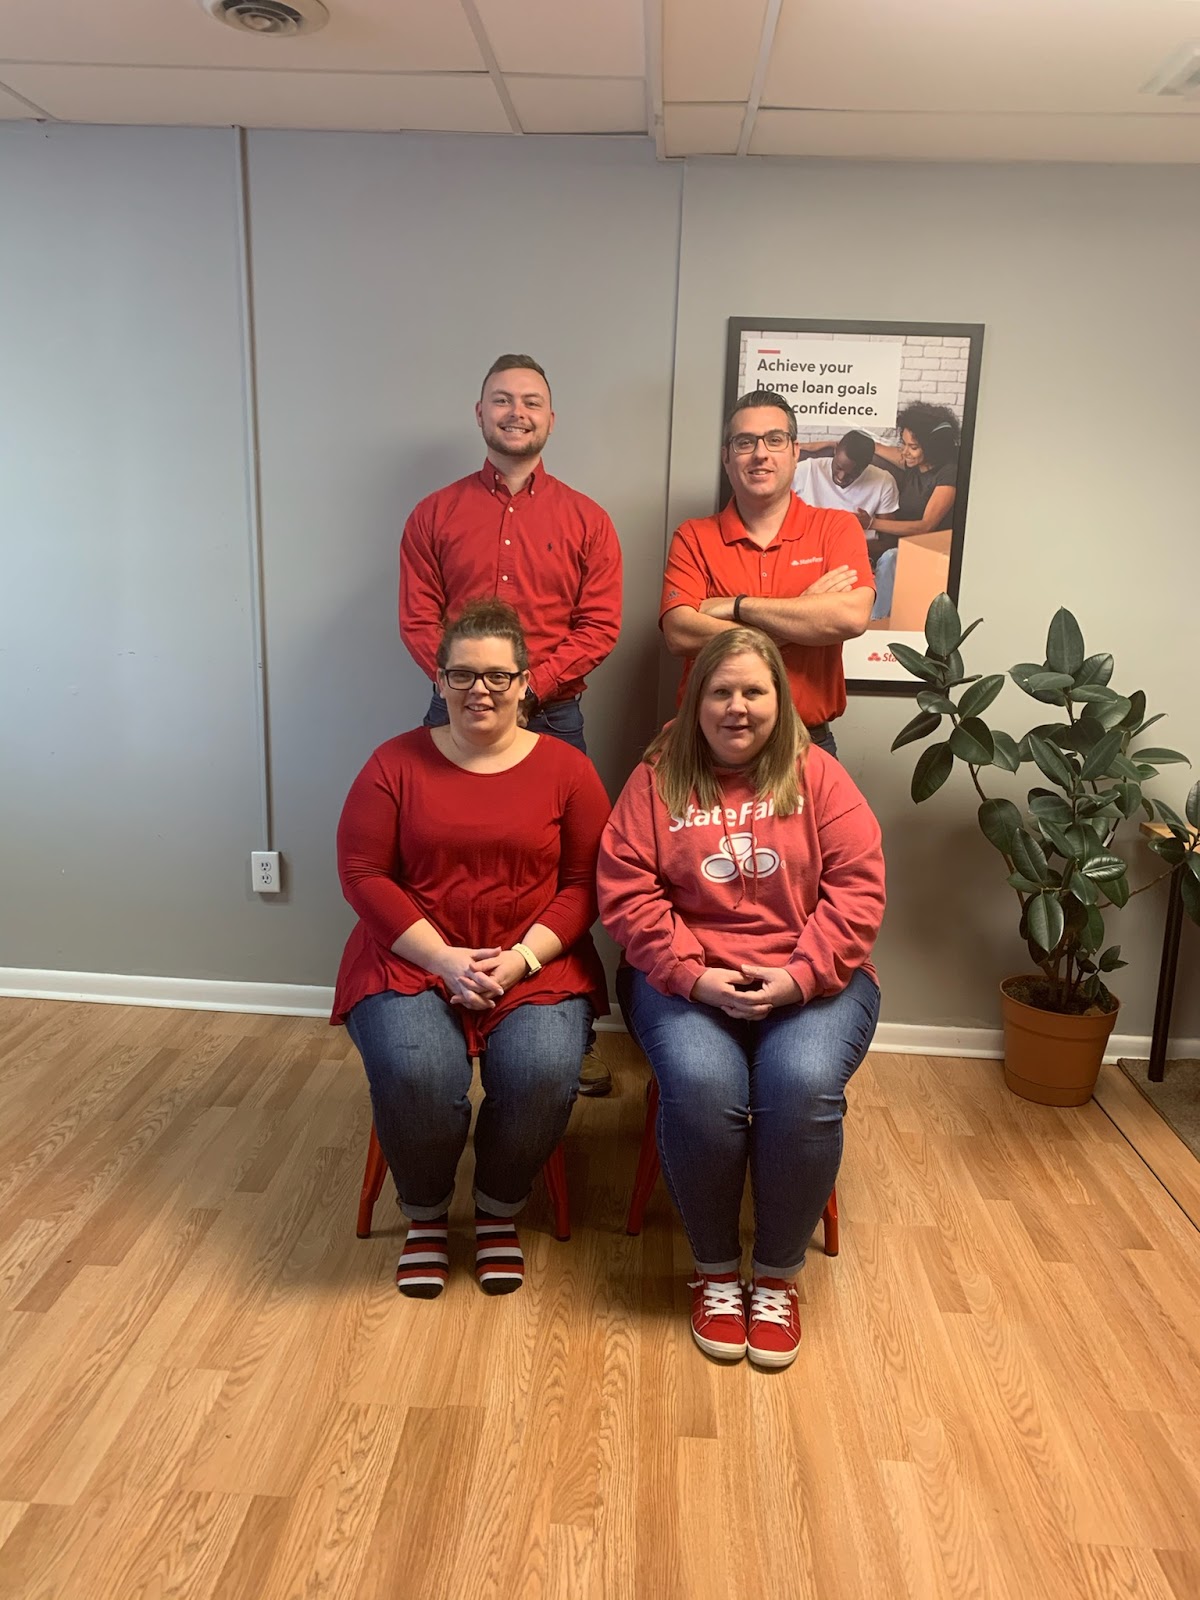 Happy National Wear Red Day!!! Jamie Barger - State Farm Insurance Agent Abingdon (276)676-1150